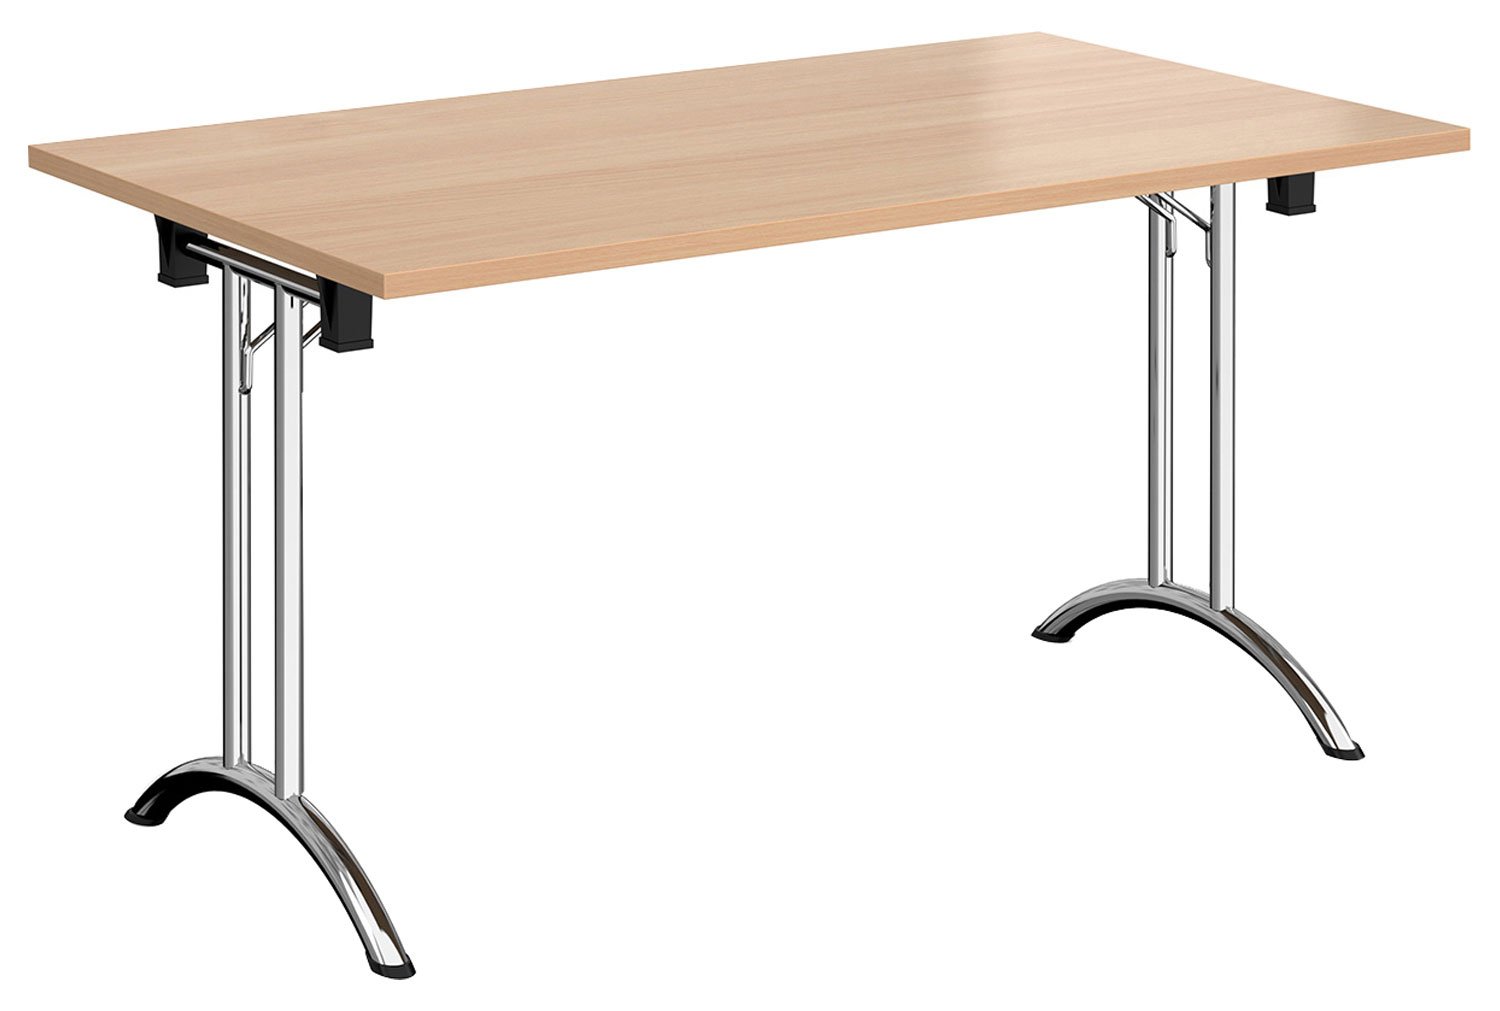 Blaga Rectangular Folding Table, 140wx80dx73h (cm), Beech, Express Delivery